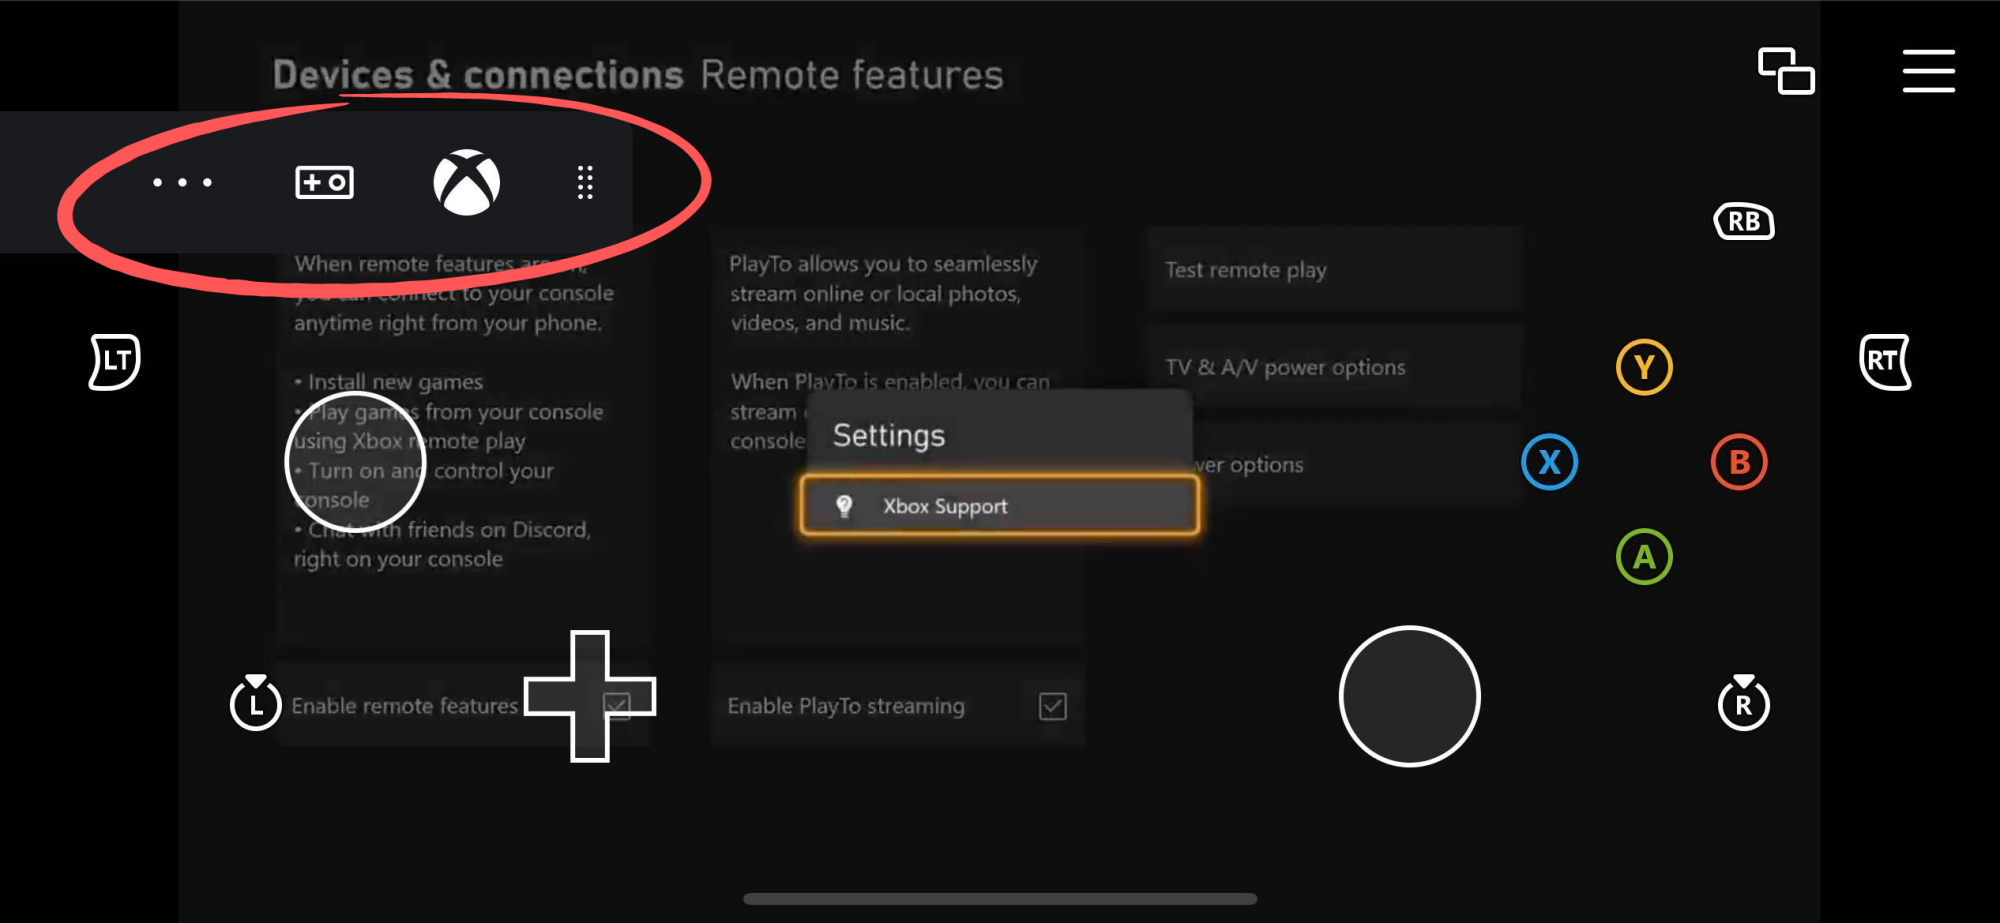 A screenshot of the remote play screen on Xbox.